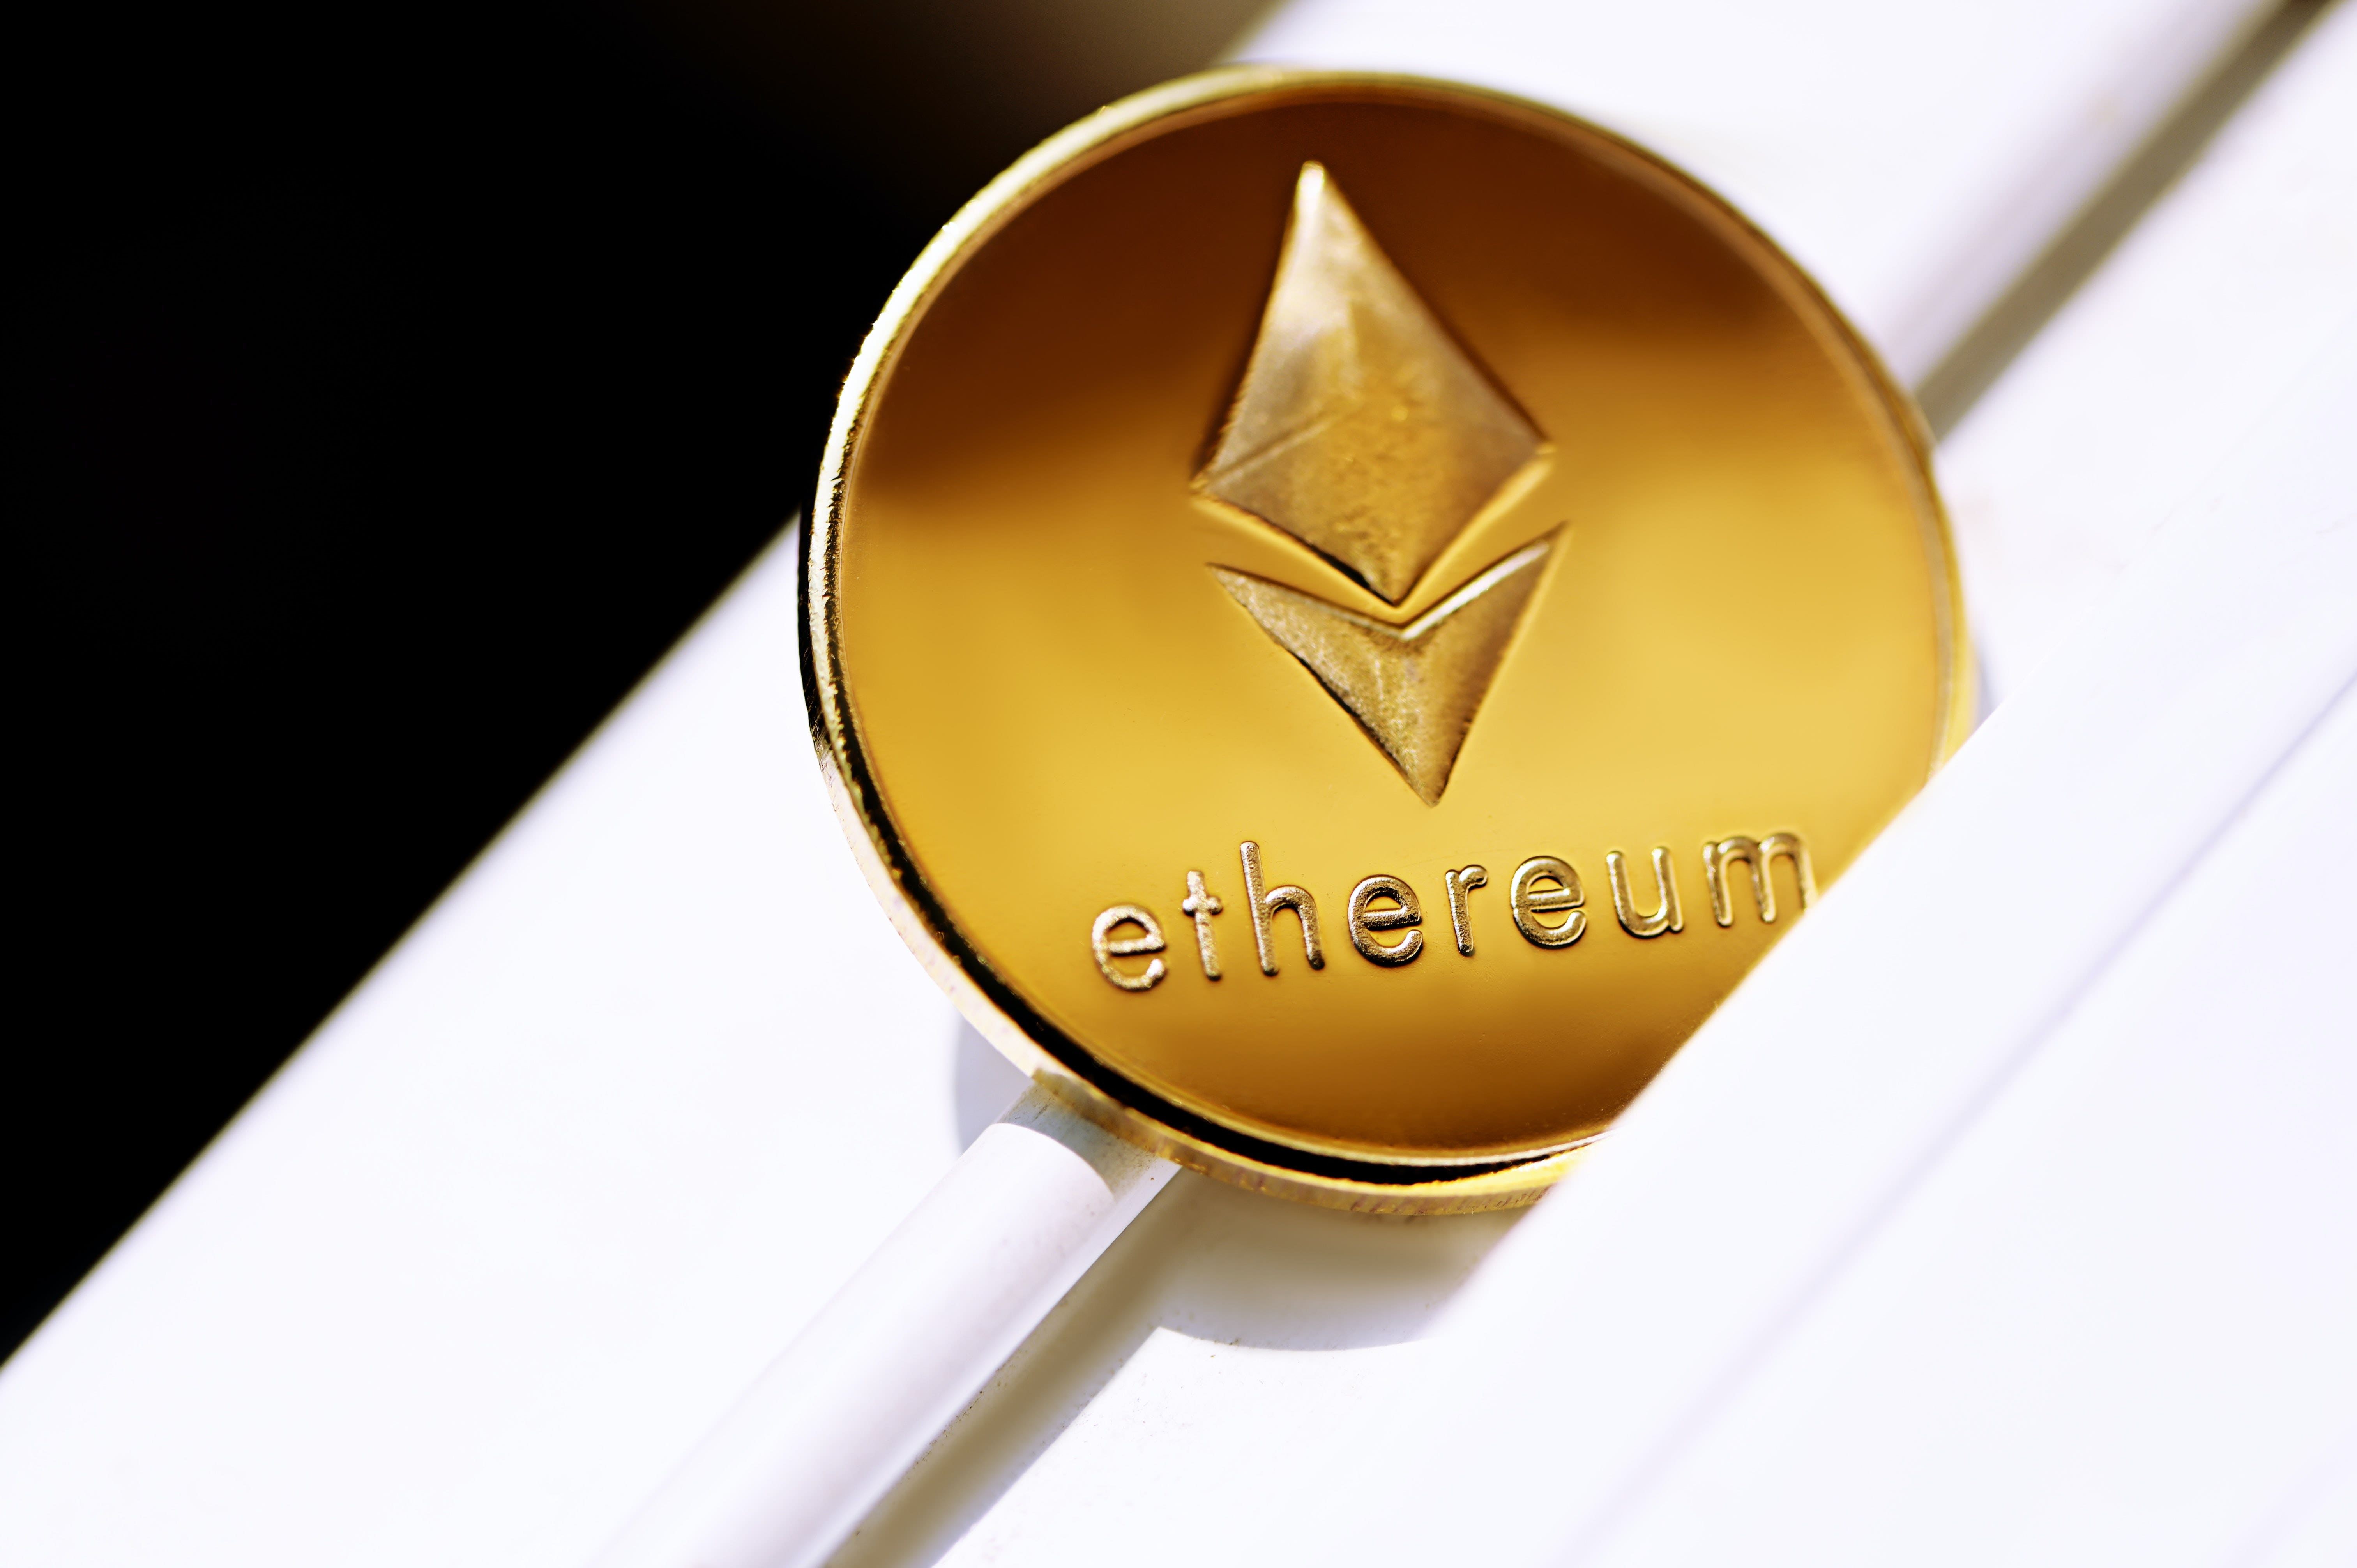 Here's What Ethereum's Q3 2021 Report Would Look Like: Network Revenue Up 511% To $1.96B